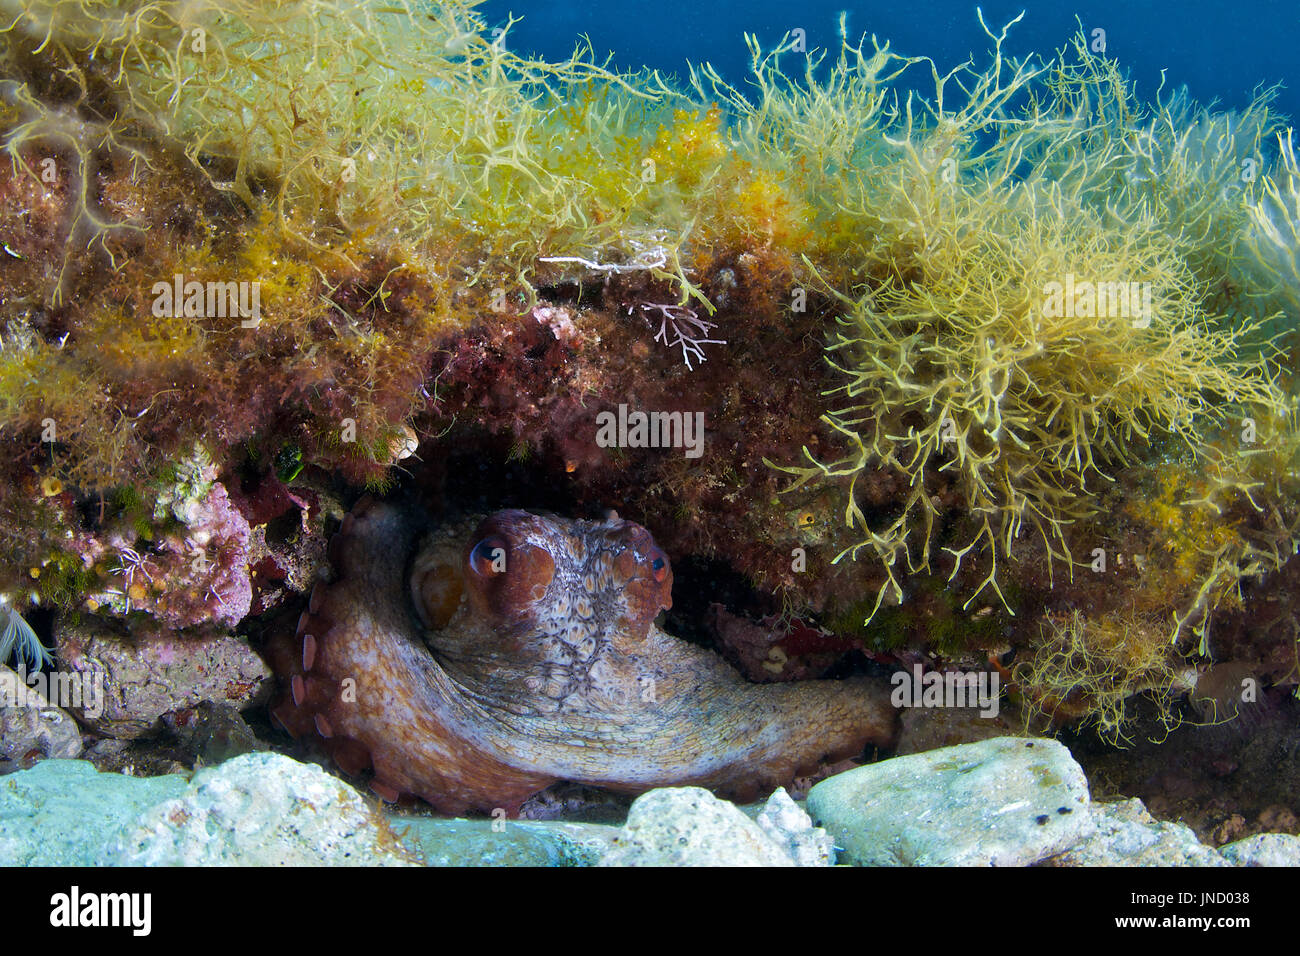 A common octopus (Octopus vulgaris) sheltered in a small cave in Ses Salines Natural Park (Formentera, Mediterranean sea, Balearic Islands, Spain) Stock Photo